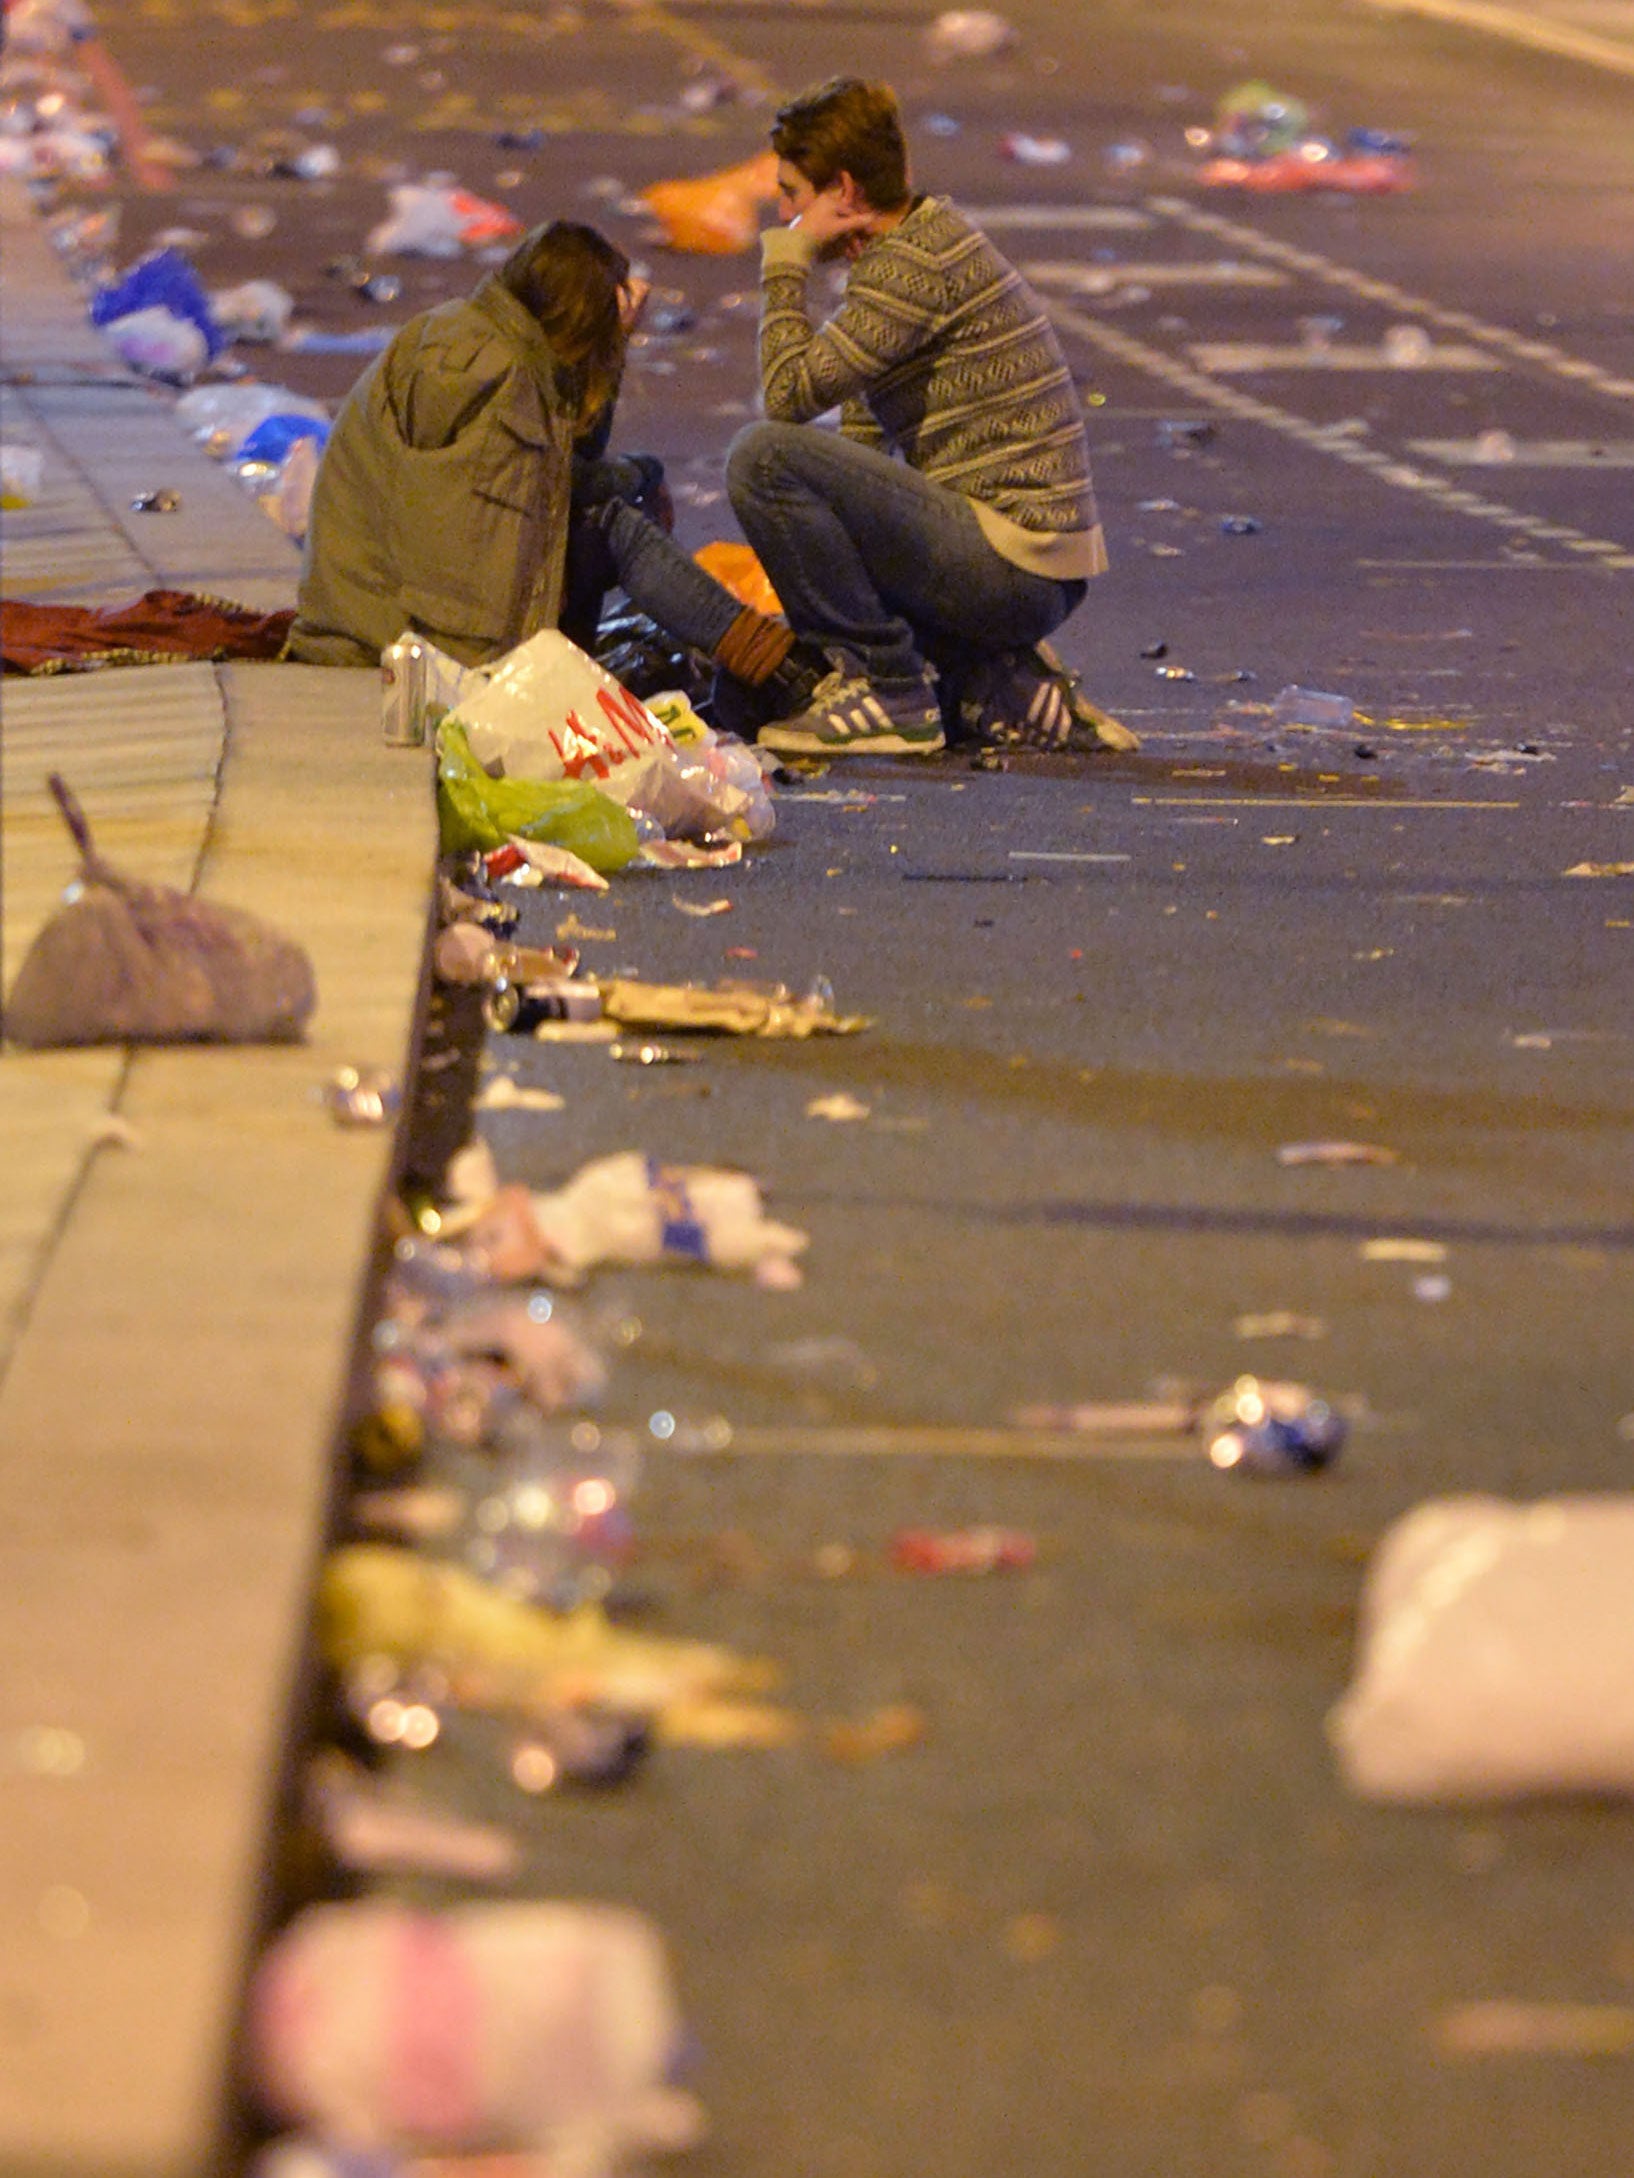 Revellers head home as the clean-up begins in central London after the New Year celebration fireworks